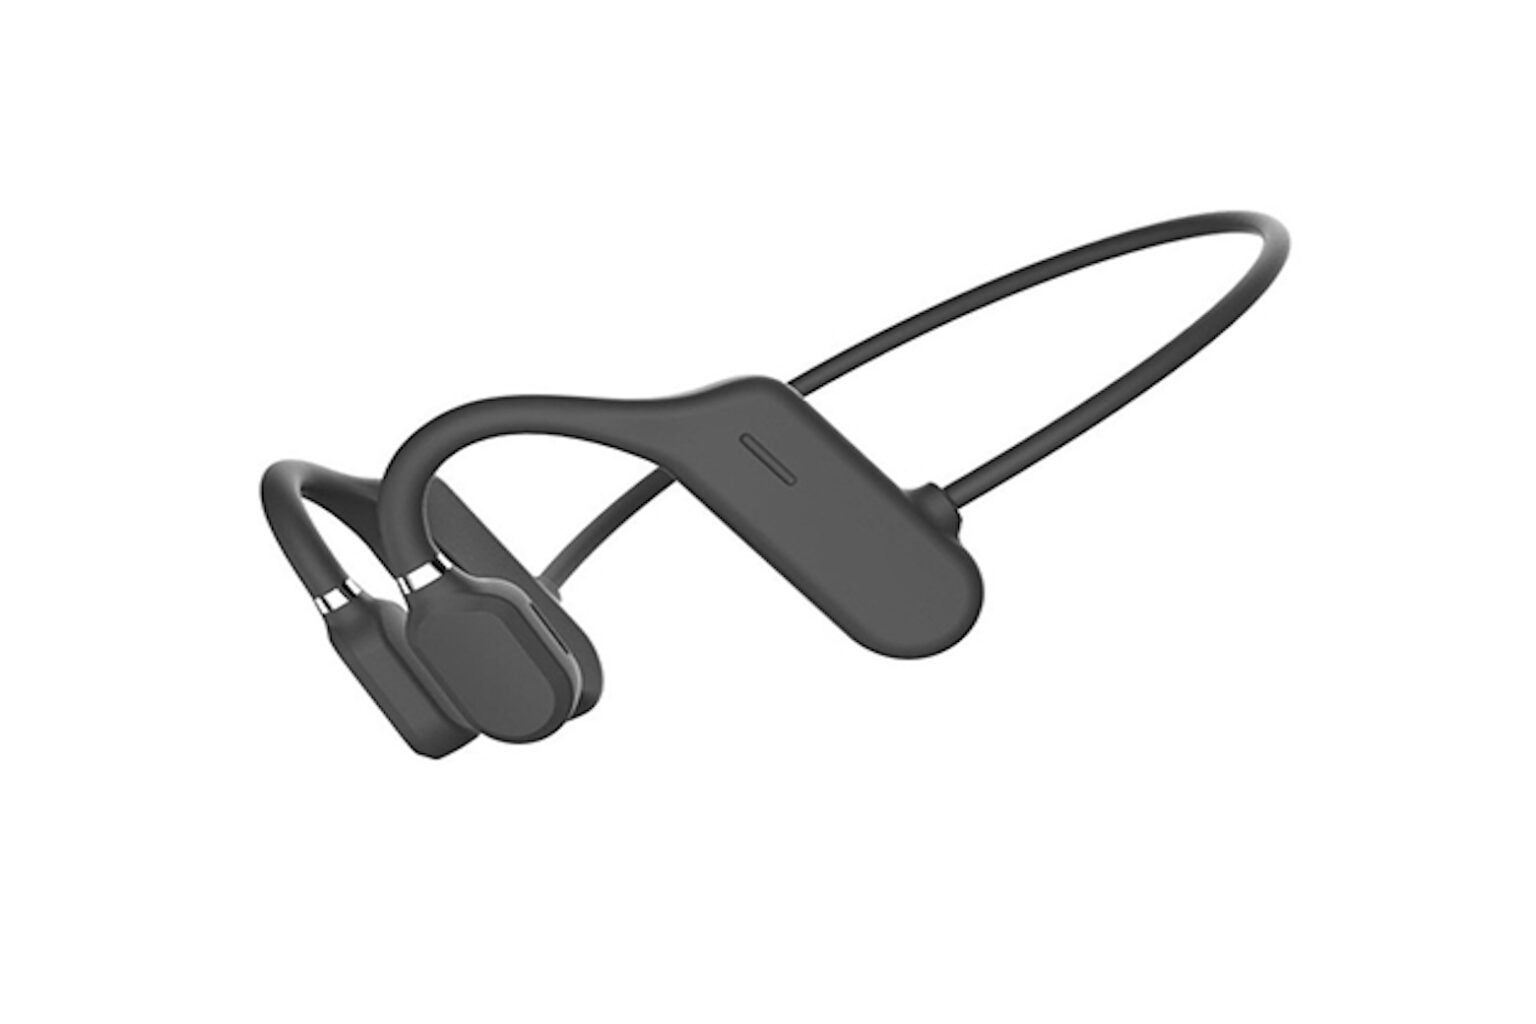 Score pre-Prime Day savings on these open ear headphones with bone conduction technology, now only $25.